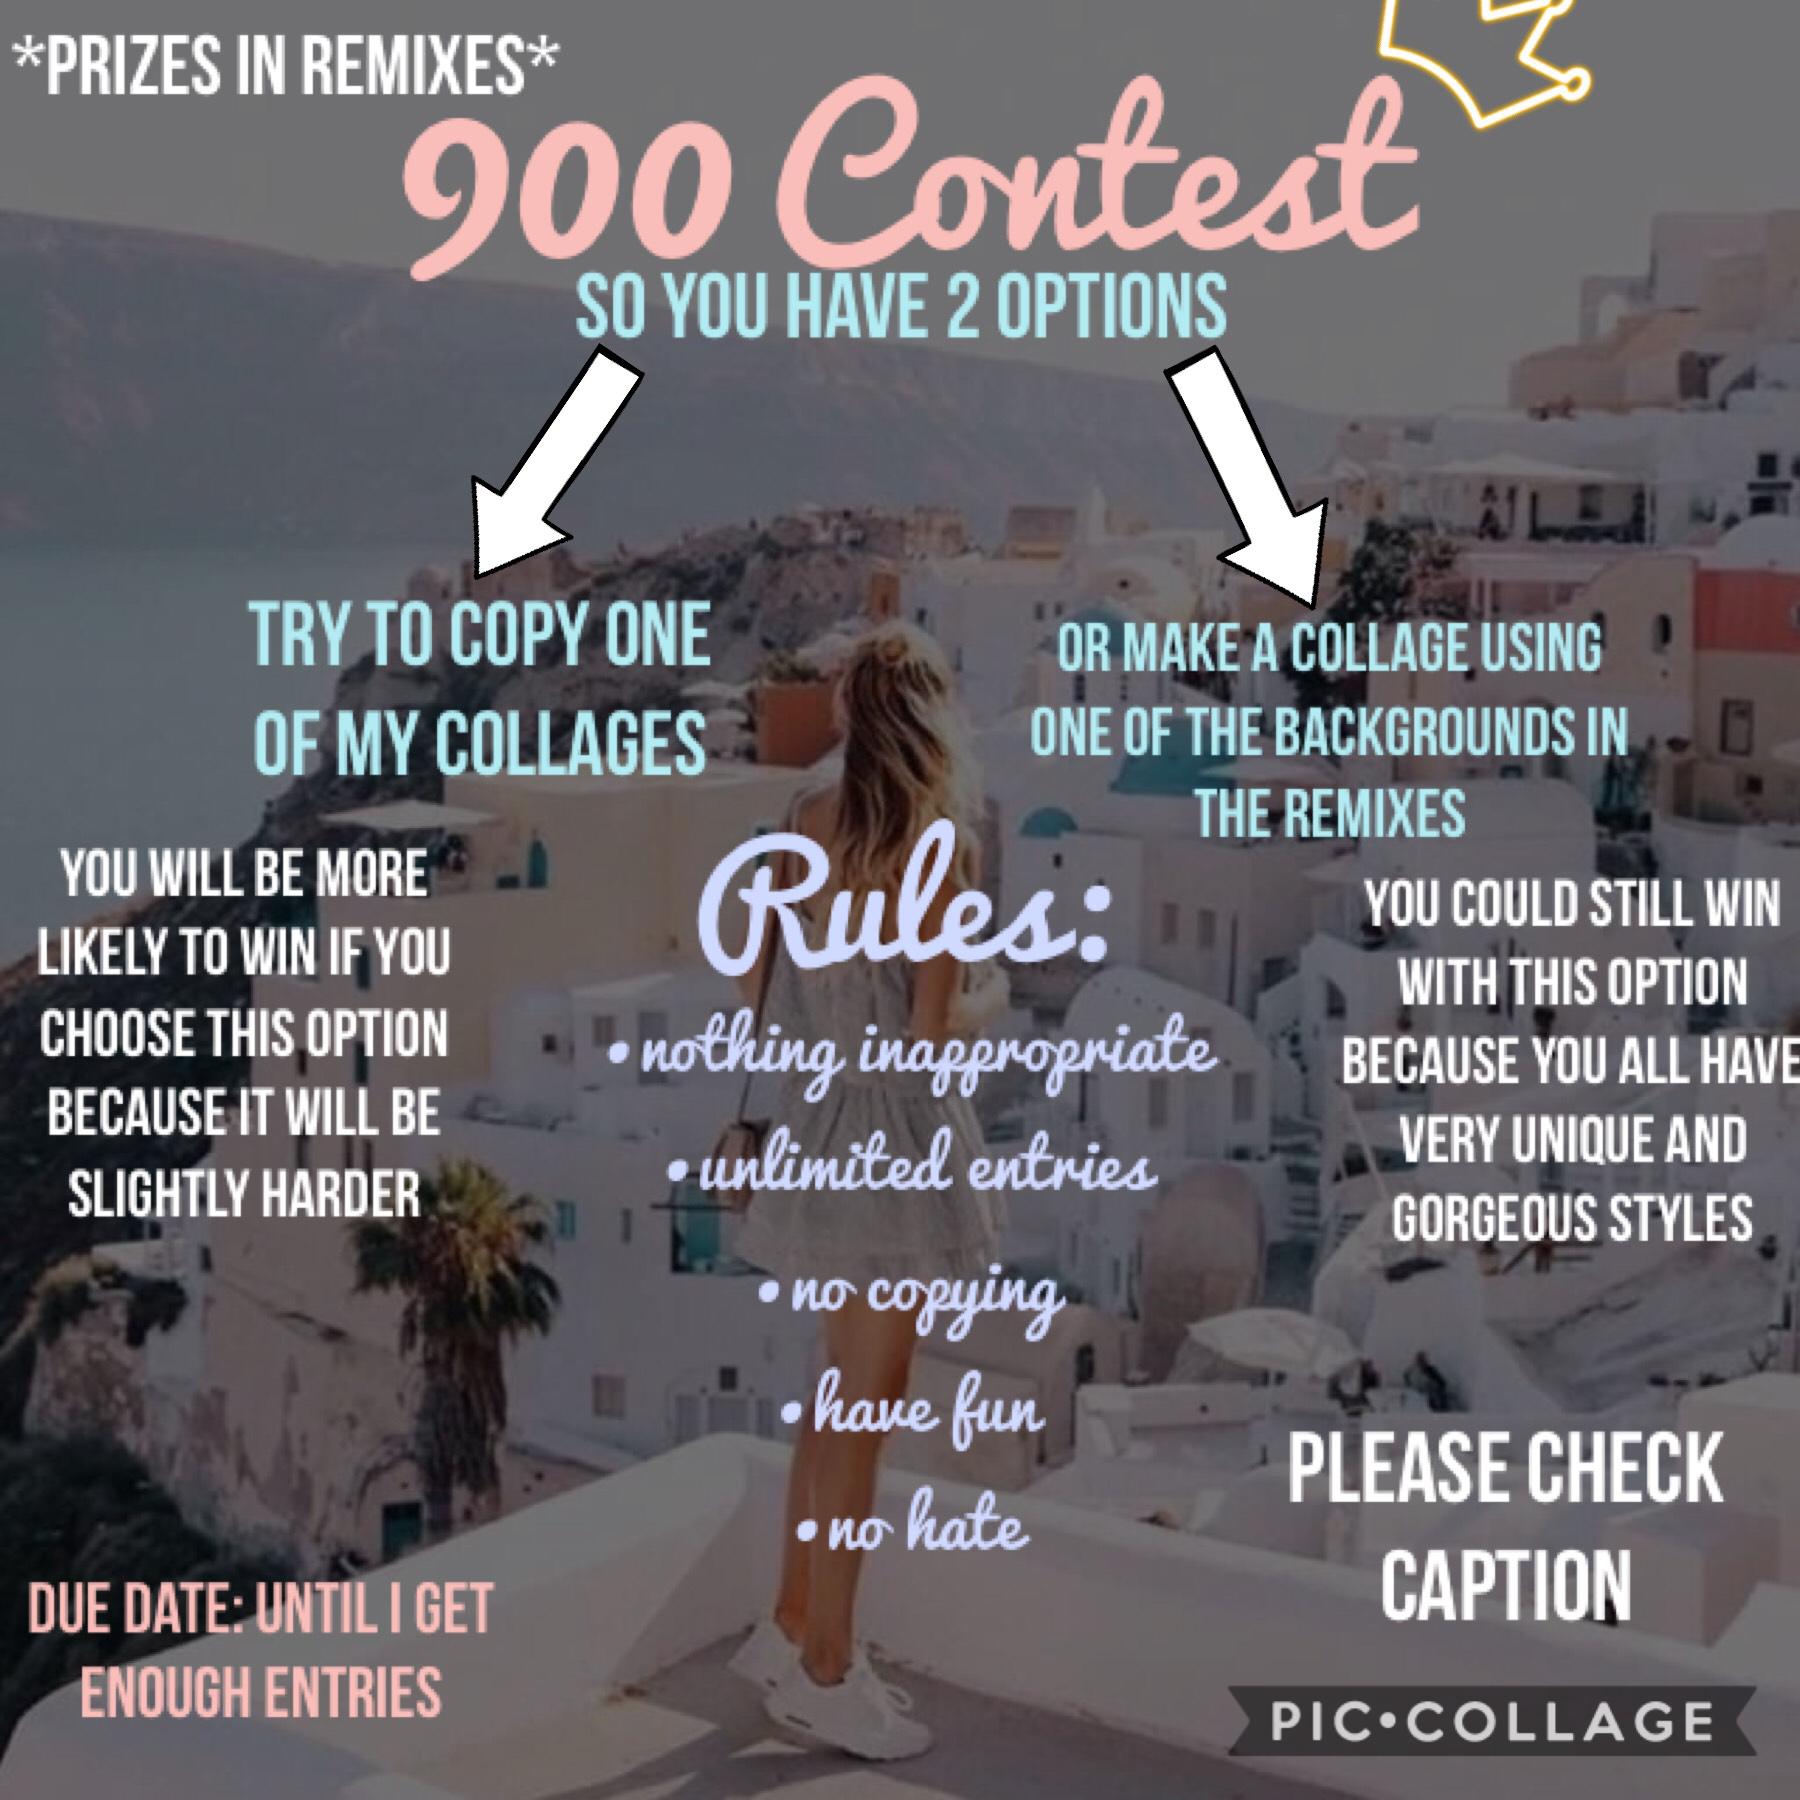 ~TAP FOR DETAILS~
Once again, prizes and backgrounds are in remixes. Sorry that this is so late and that it has an awful layout. Also, please comment if you have any further questions! Good Luck😊